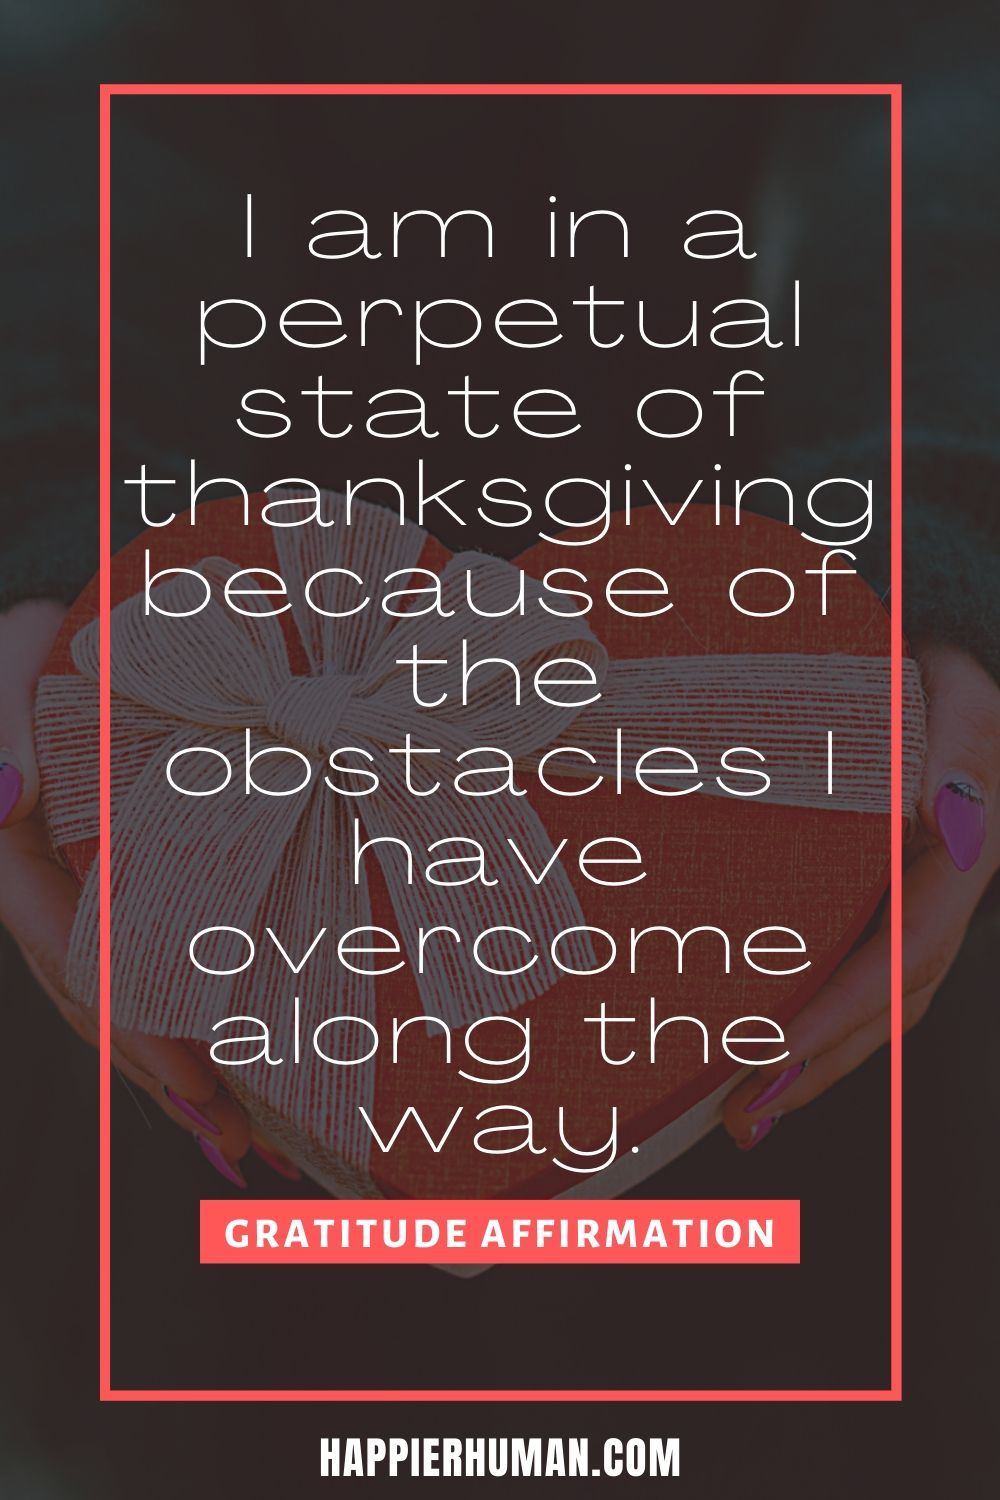 Gratitude Affirmations - I am in a perpetual state of thanksgiving because of the obstacles I have overcome along the way. | morning affirmations | daily gratitude affirmations | gratitude affirmation #affirmationsdaily #affirmationstoactions #gratitudeaffirmations